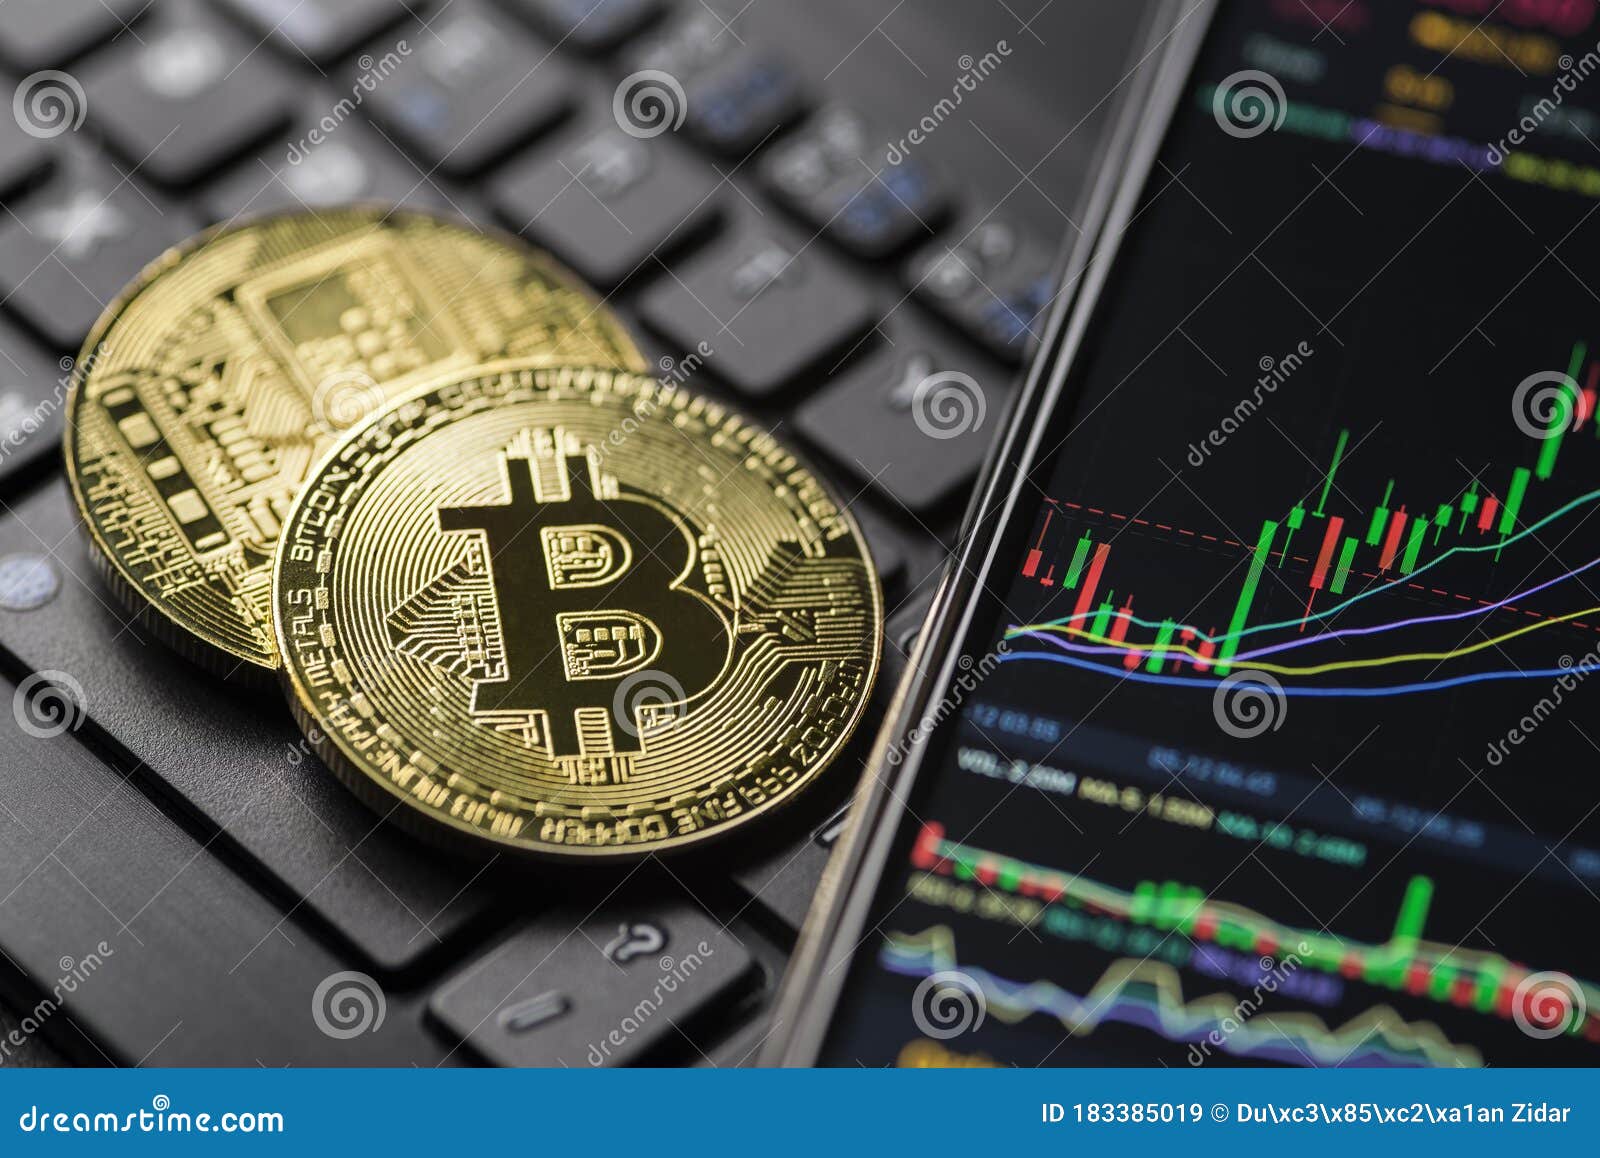 bitcoin cryptocurrency trading